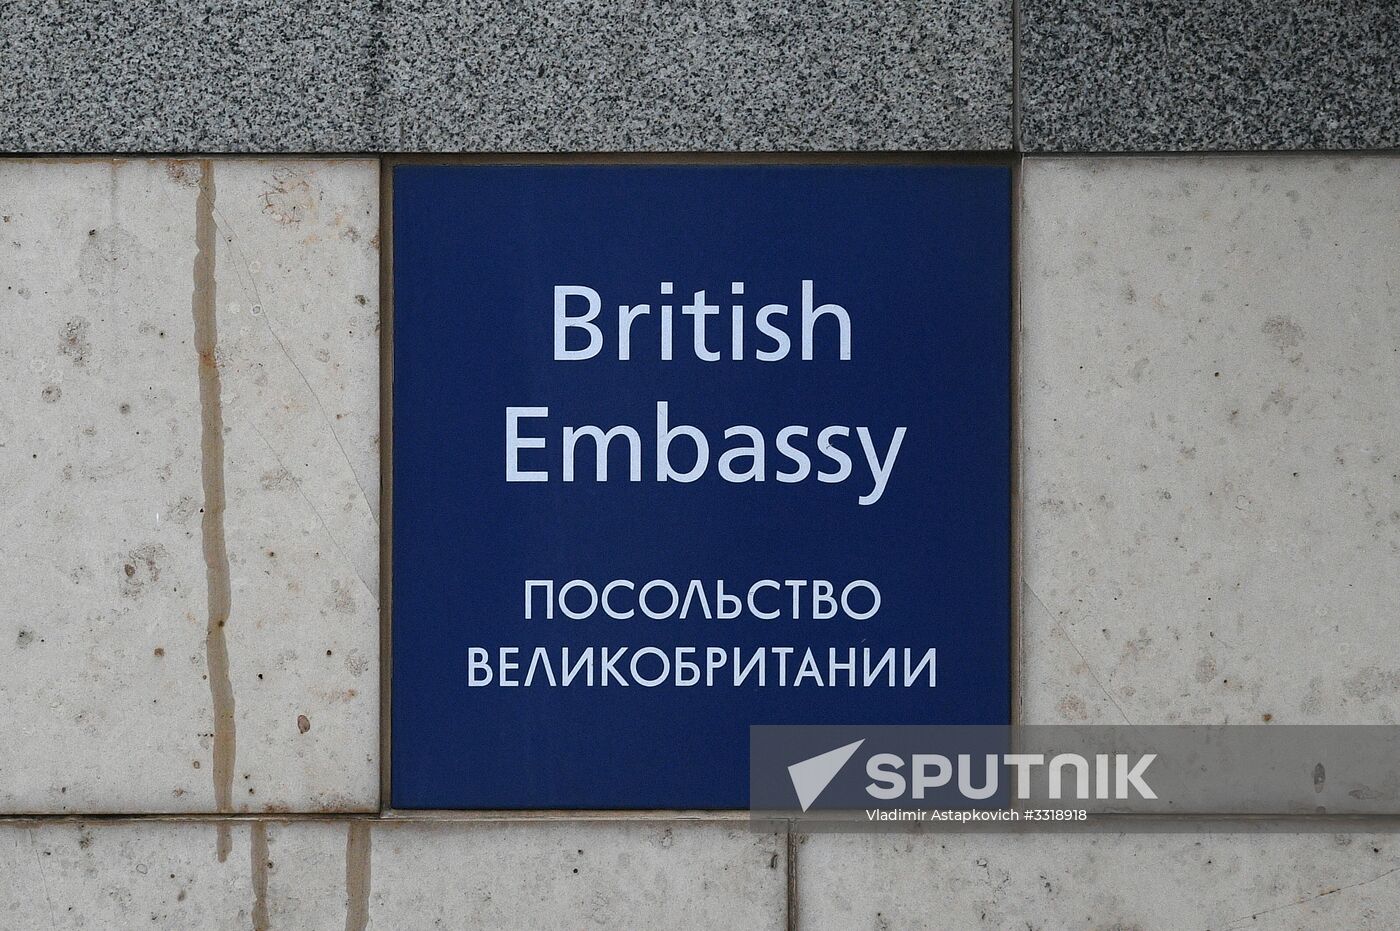 Russian Foreign Ministry summons British Ambassador Laurie Bristow